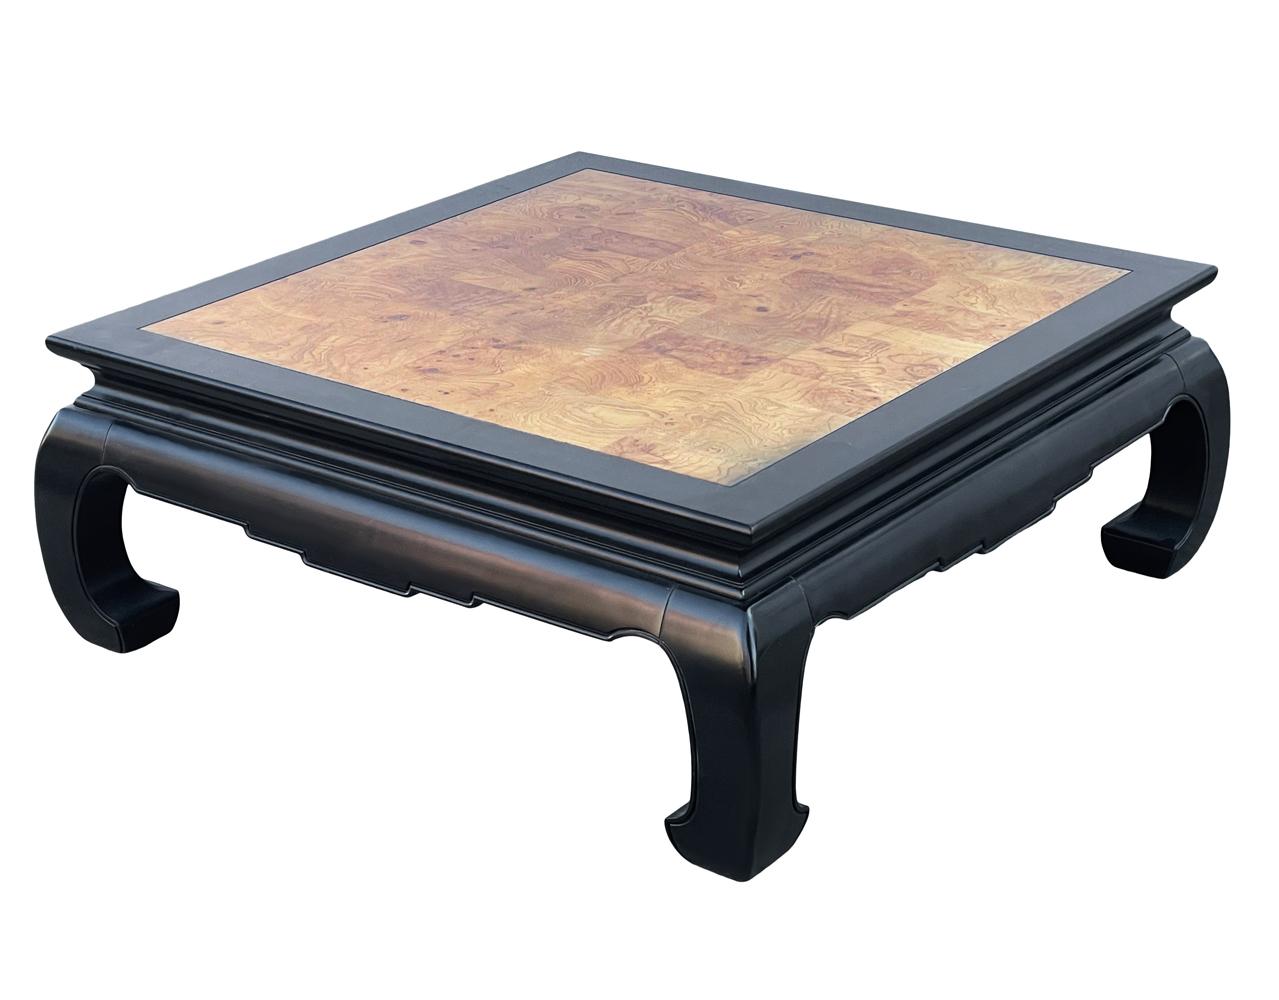 Late 20th Century Hollywood Regency Asian Modern Square Cocktail Table in Black & Burl Wood For Sale